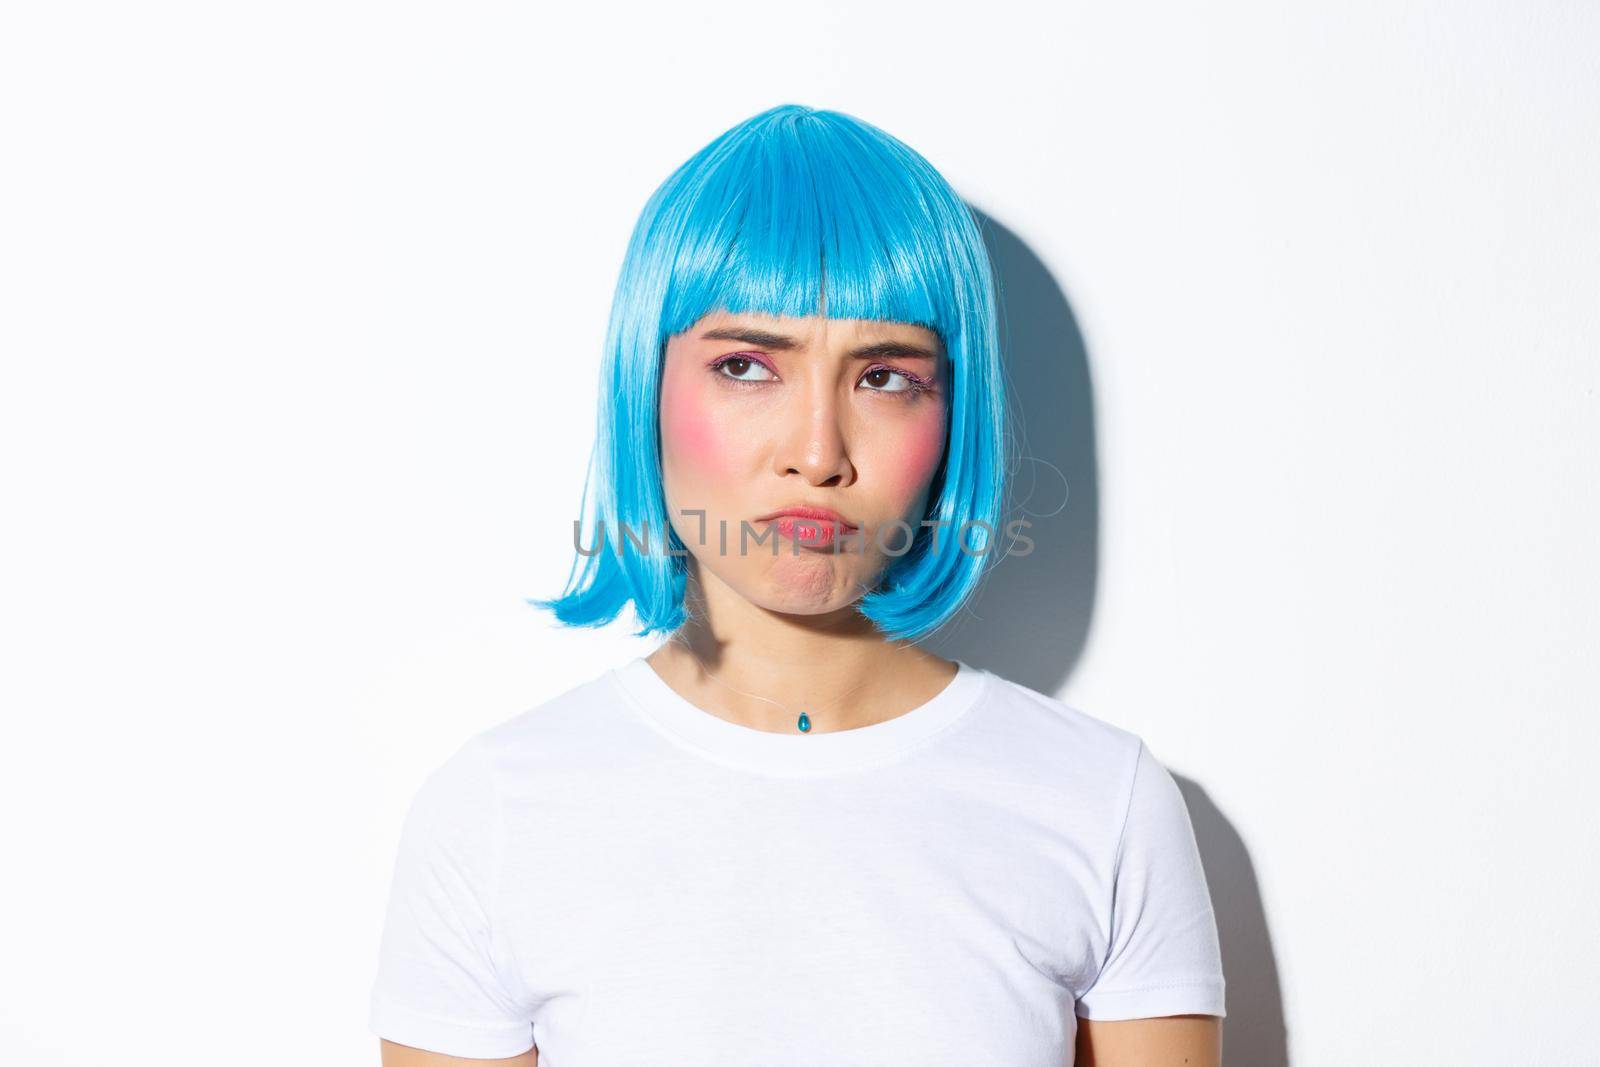 Image of cute asian girl in blue wig looking disappointed or jealous, sulking while stare at upper left corner, standing against white background.